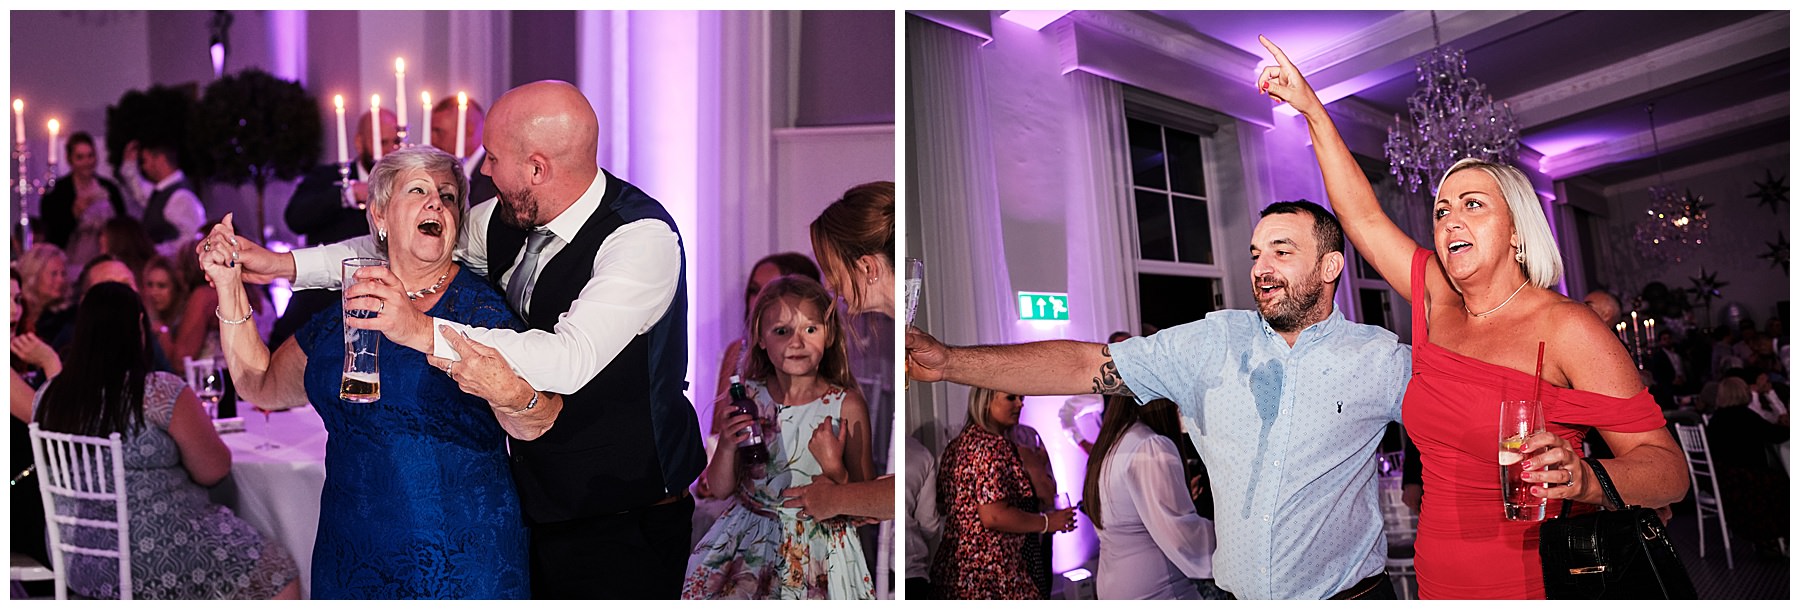 Our bride changed into a party dress, it was time to seriously get the party going at Hawkstone Hall in Shrewsbury by Documentary Wedding Photographer Stuart James